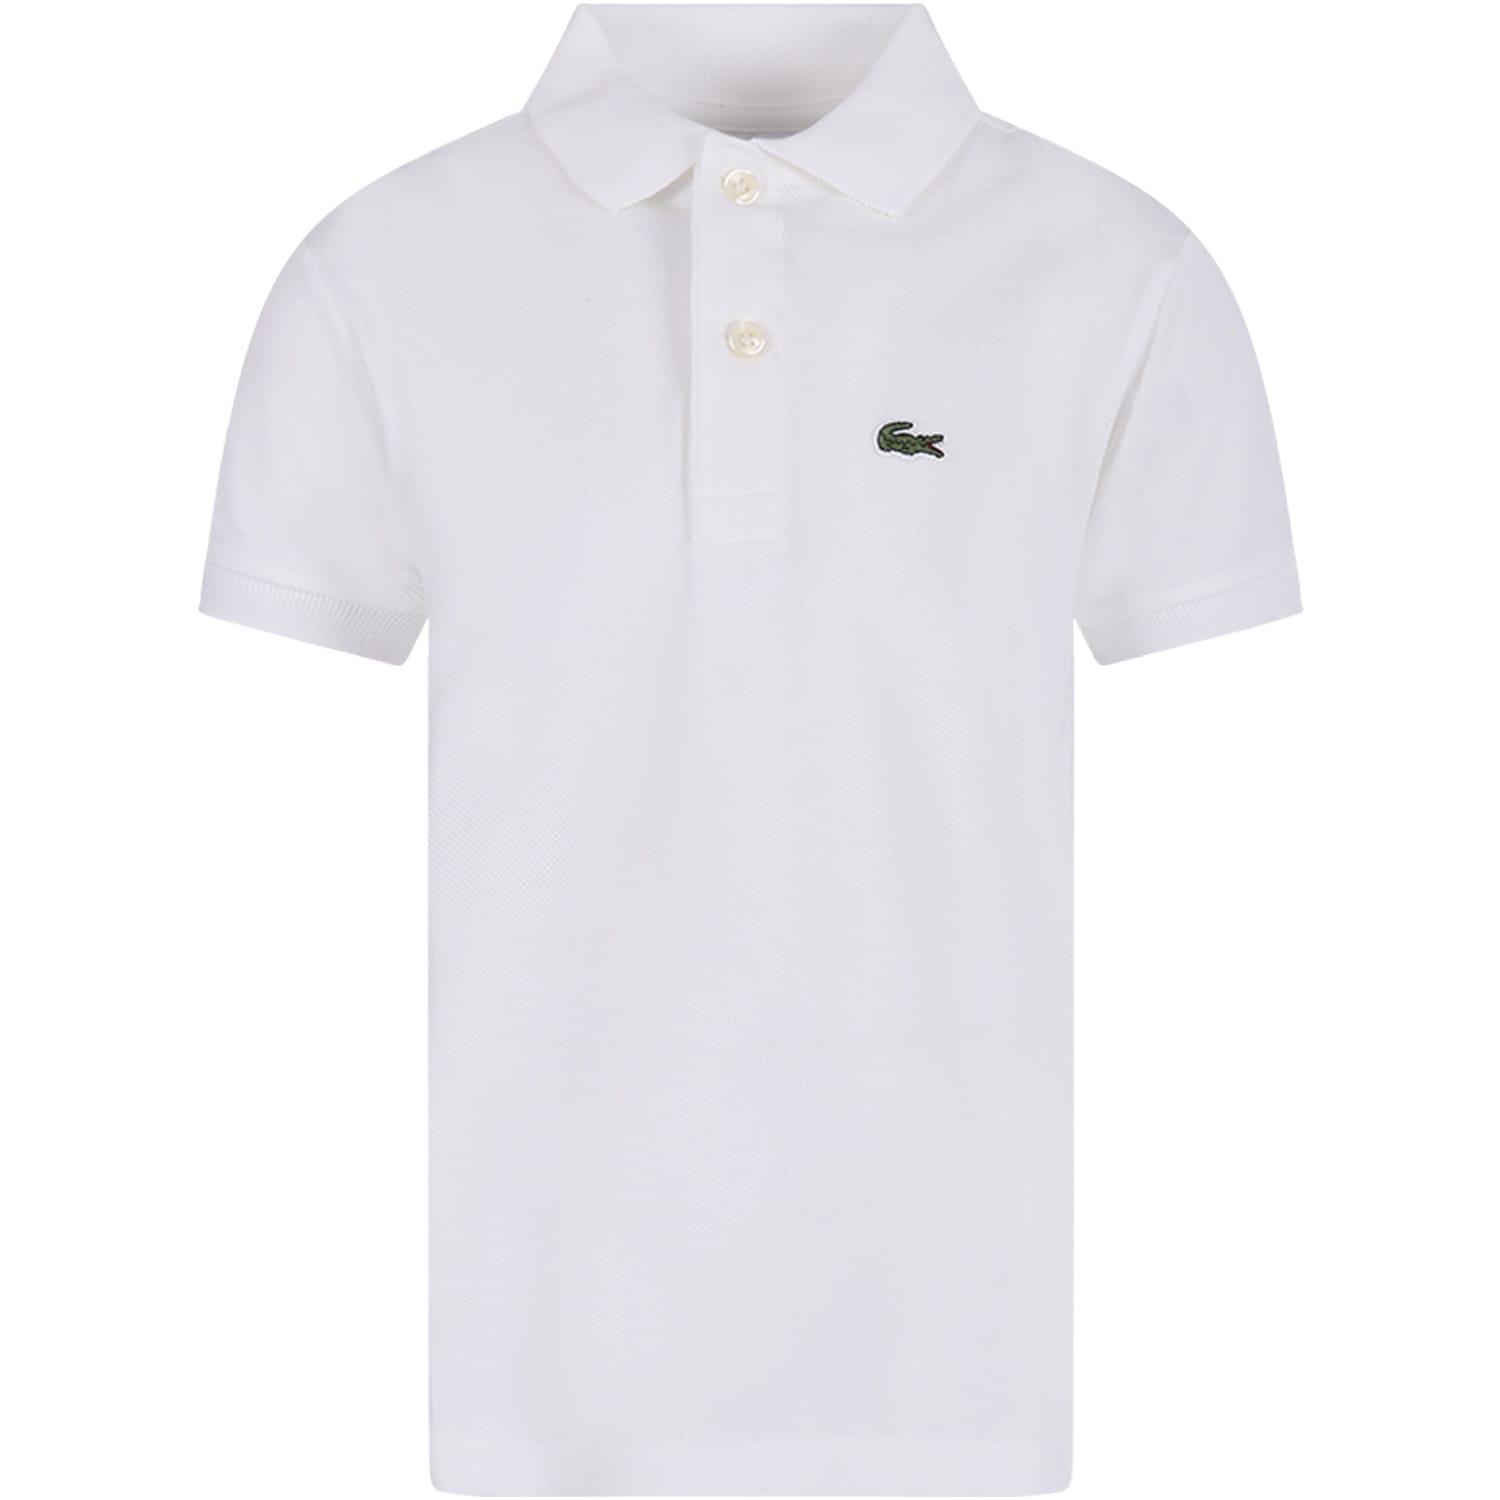 Lacoste White Polo Shirt For Boy With Green Crocodile